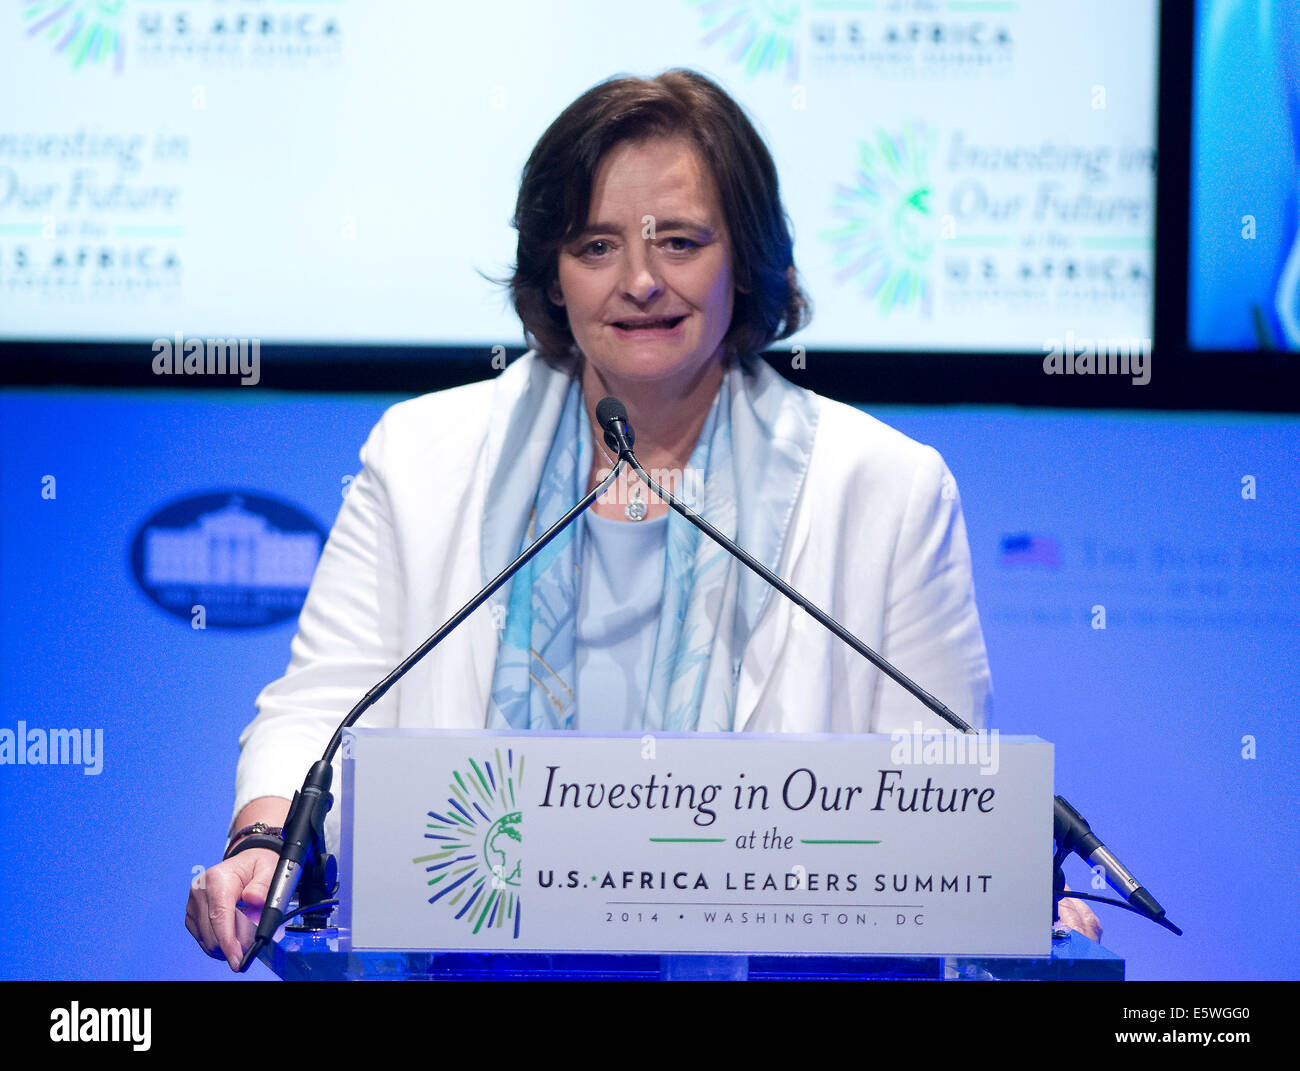 Washington DC, US. 6th Aug, 2014.  Cherie Blair, wife of former British Prime Minister Tony Blair and founder, Cherie Blair Foundation for Women, makes remarks at the 'Investing in our Future at the U.S. - Africa Leaders Summit at the John F. Kennedy Center for the Performing Arts in Washington, DC on Wednesday, August 6, 2014. Credit:  dpa picture alliance/Alamy Live News Stock Photo